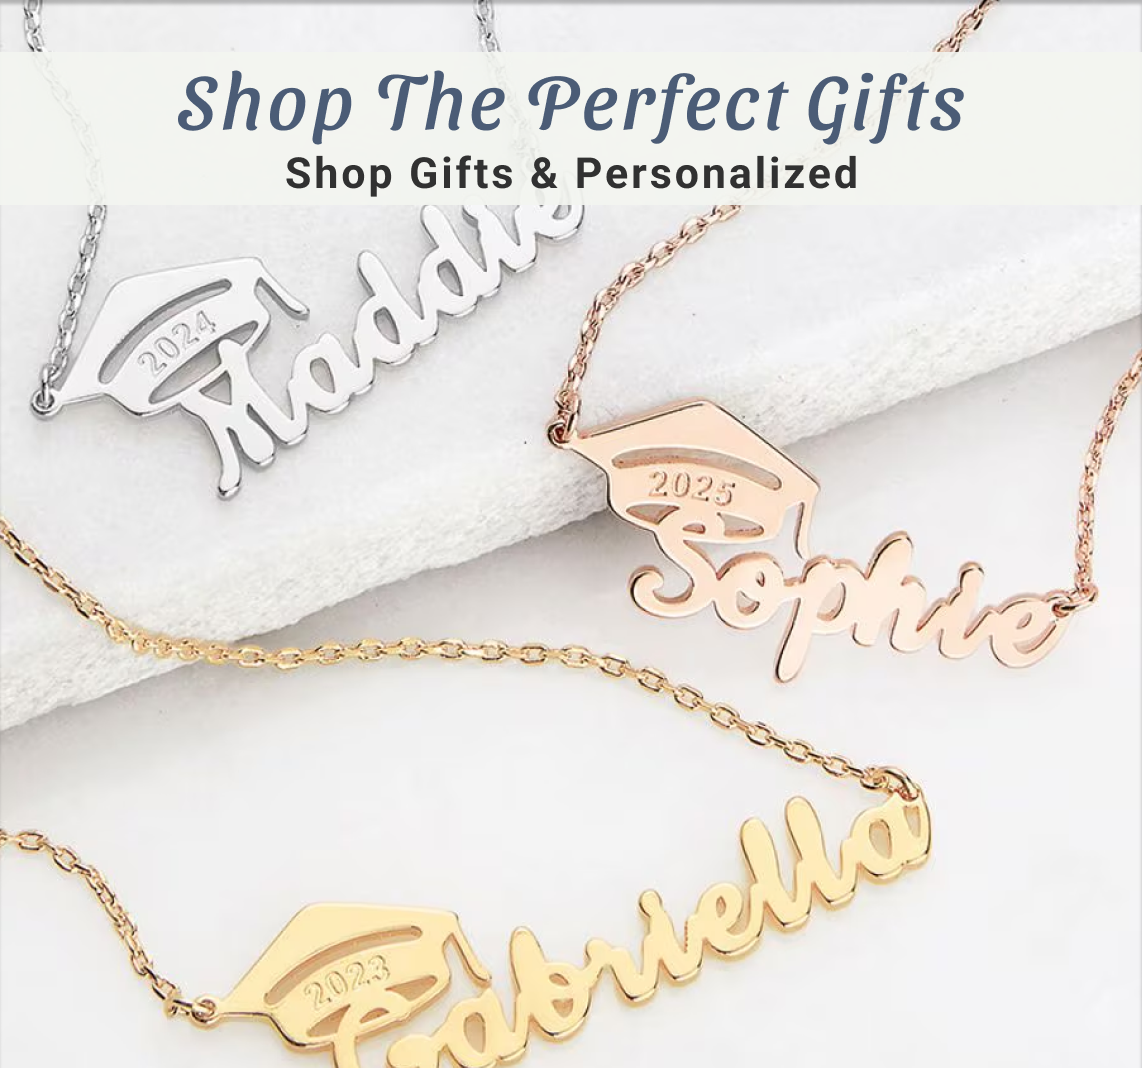 Gifts & Personalized